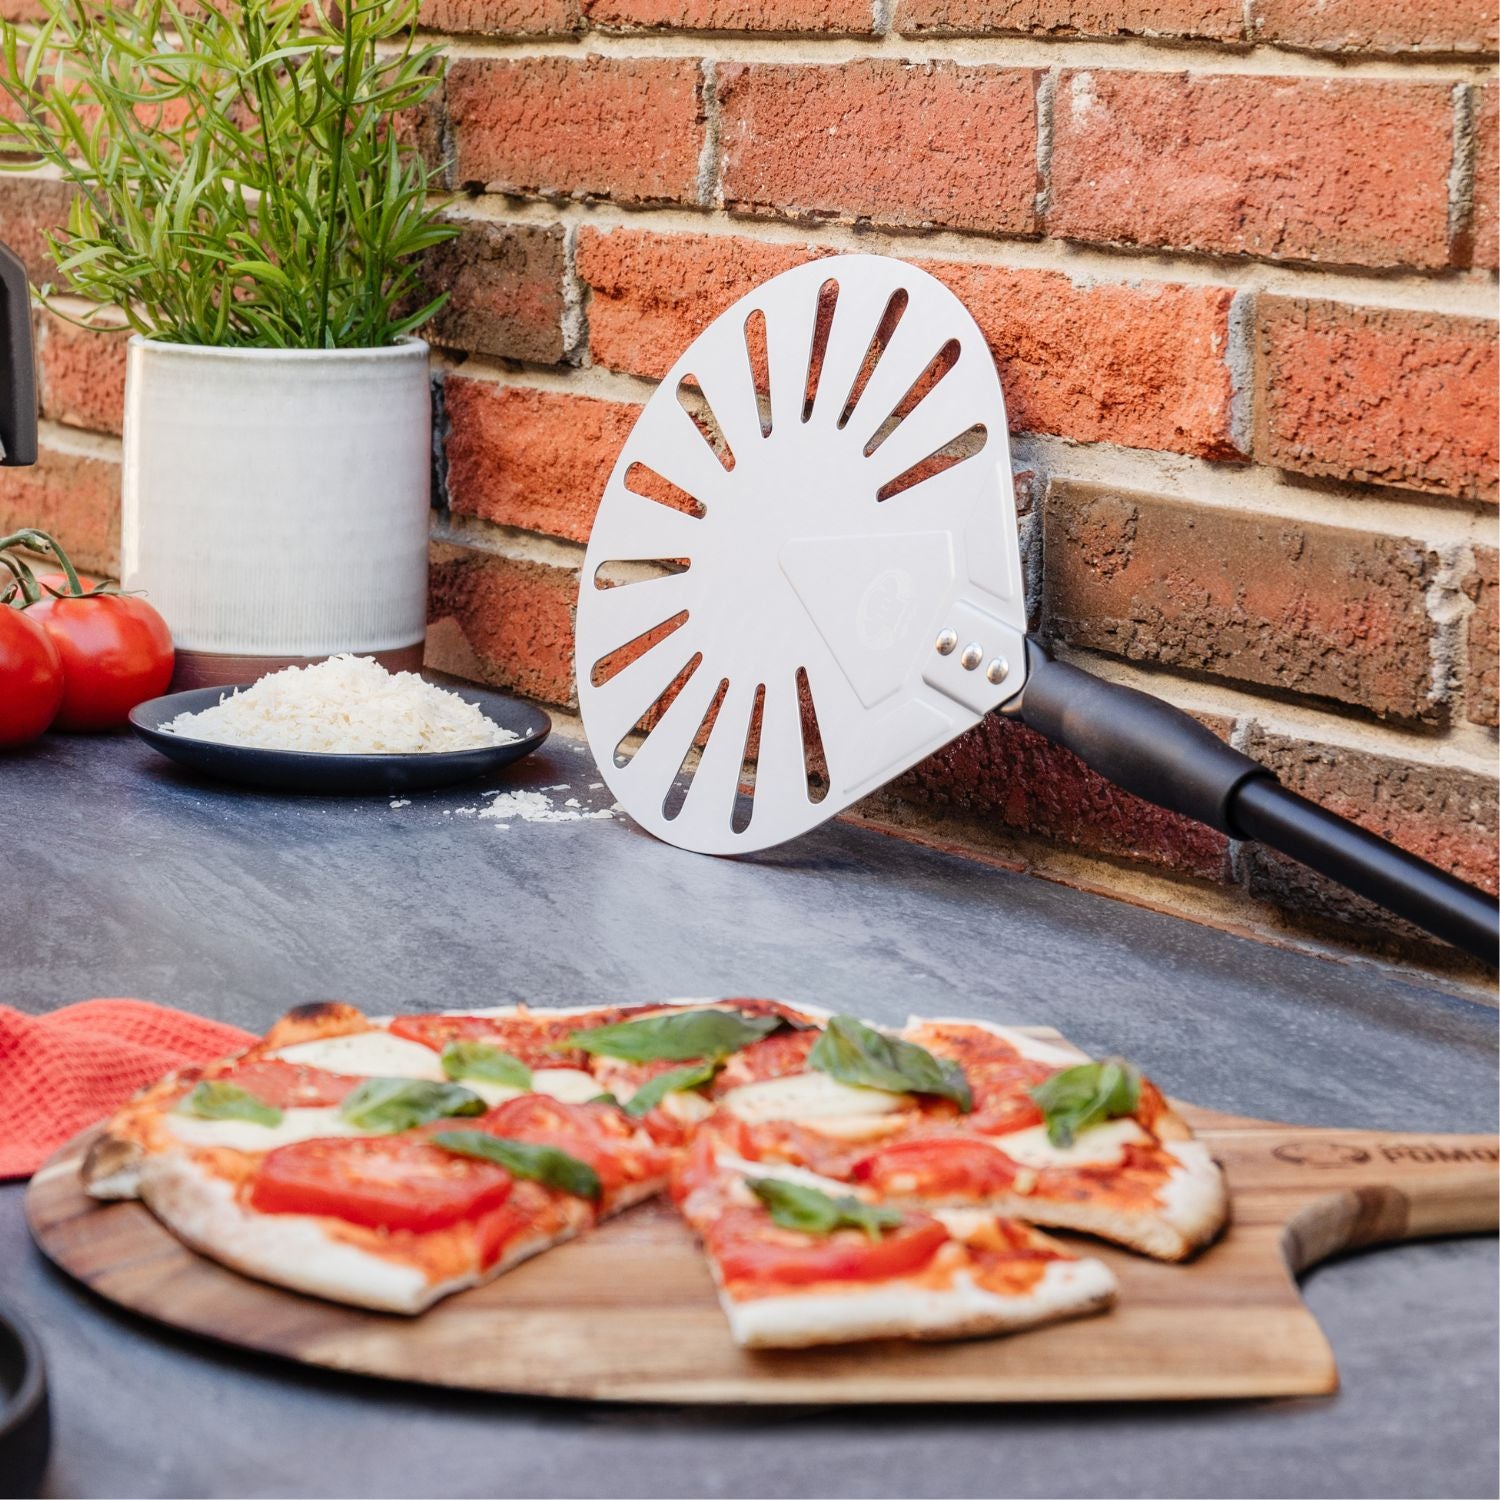 Komista Perforated Professional Aluminum Pizza Peel, 12x14 inch  Hard-Anodized Blade, Fully Aluminum Alloy, Easy to Clean and Very Durable,  Extra